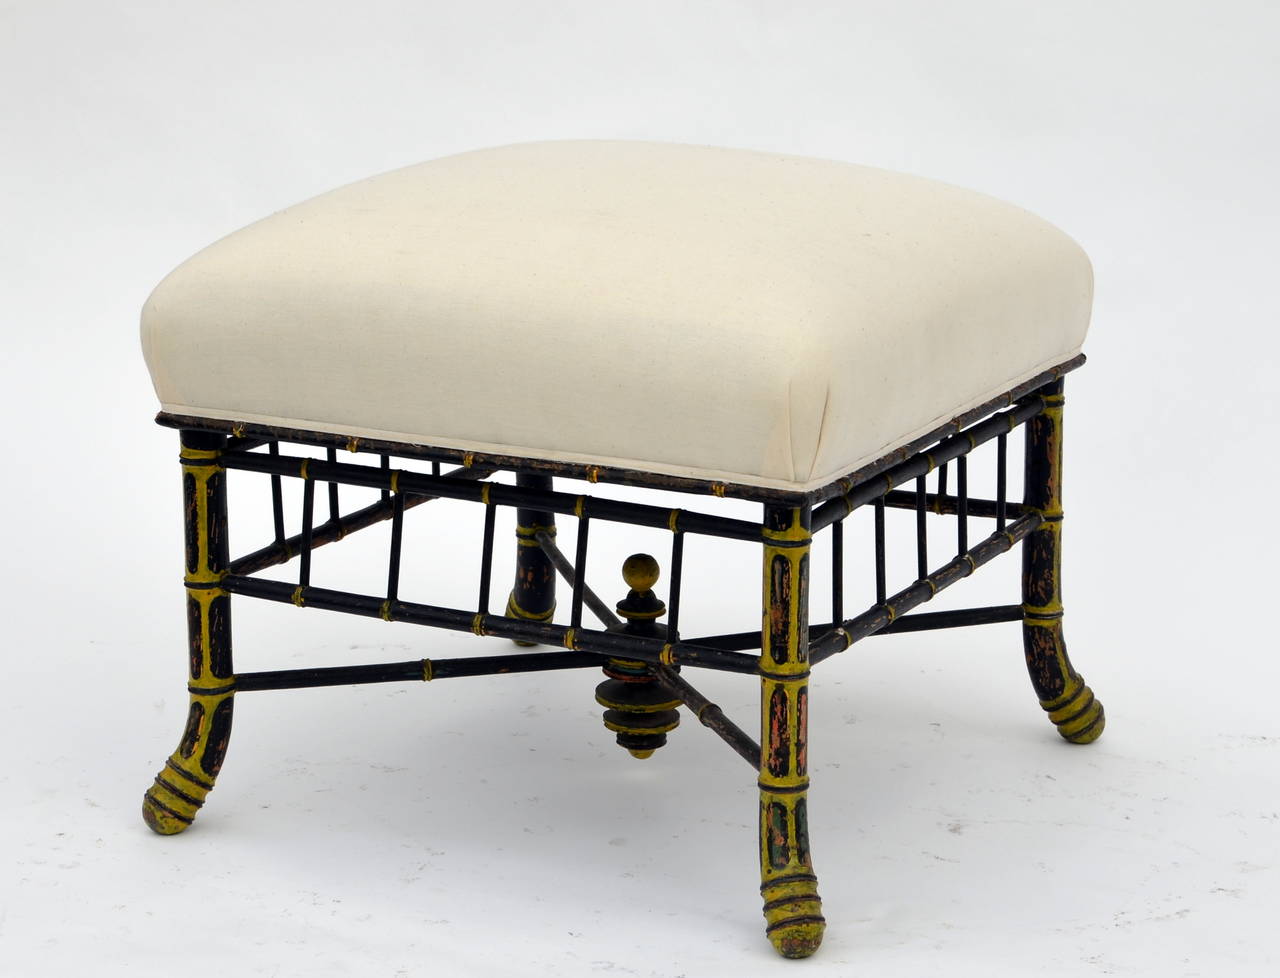 Chic Napoleon III Square Ottoman / Large Stool. Restored and reupholstered in muslin.